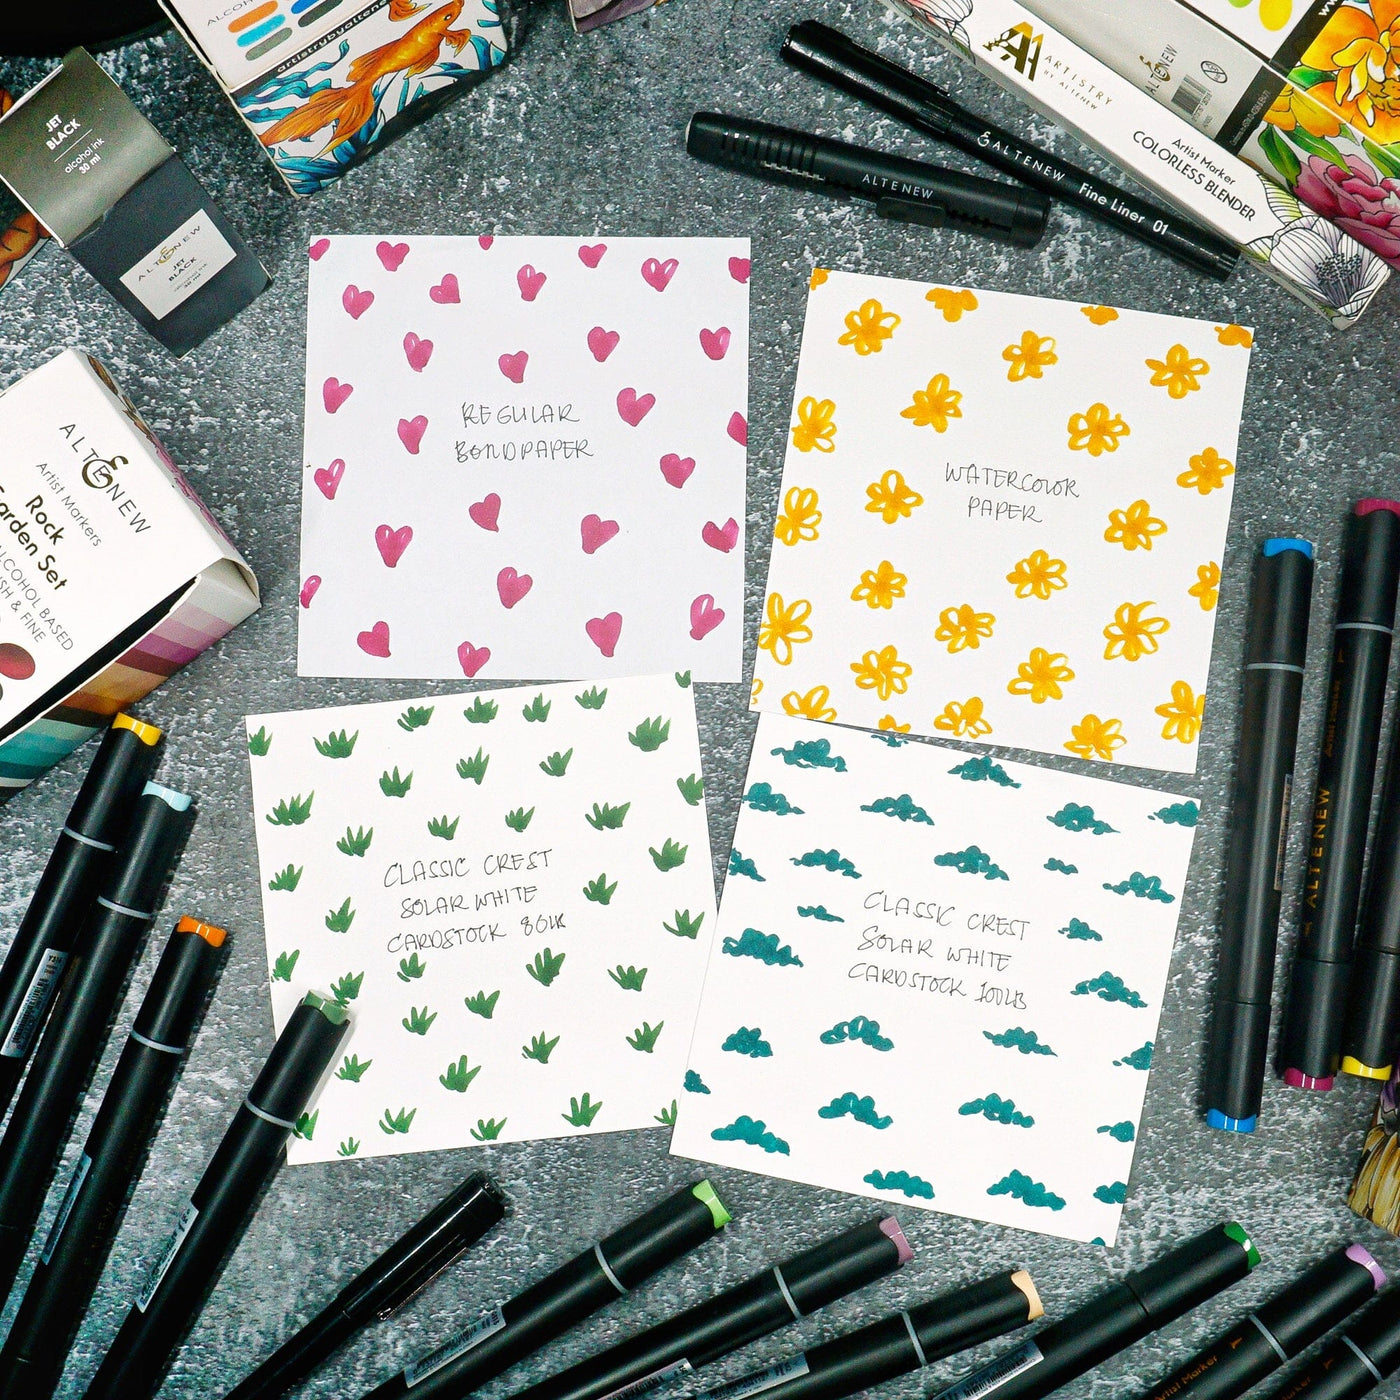 Class Artist in You: Coloring 101 with Artist Alcohol Markers